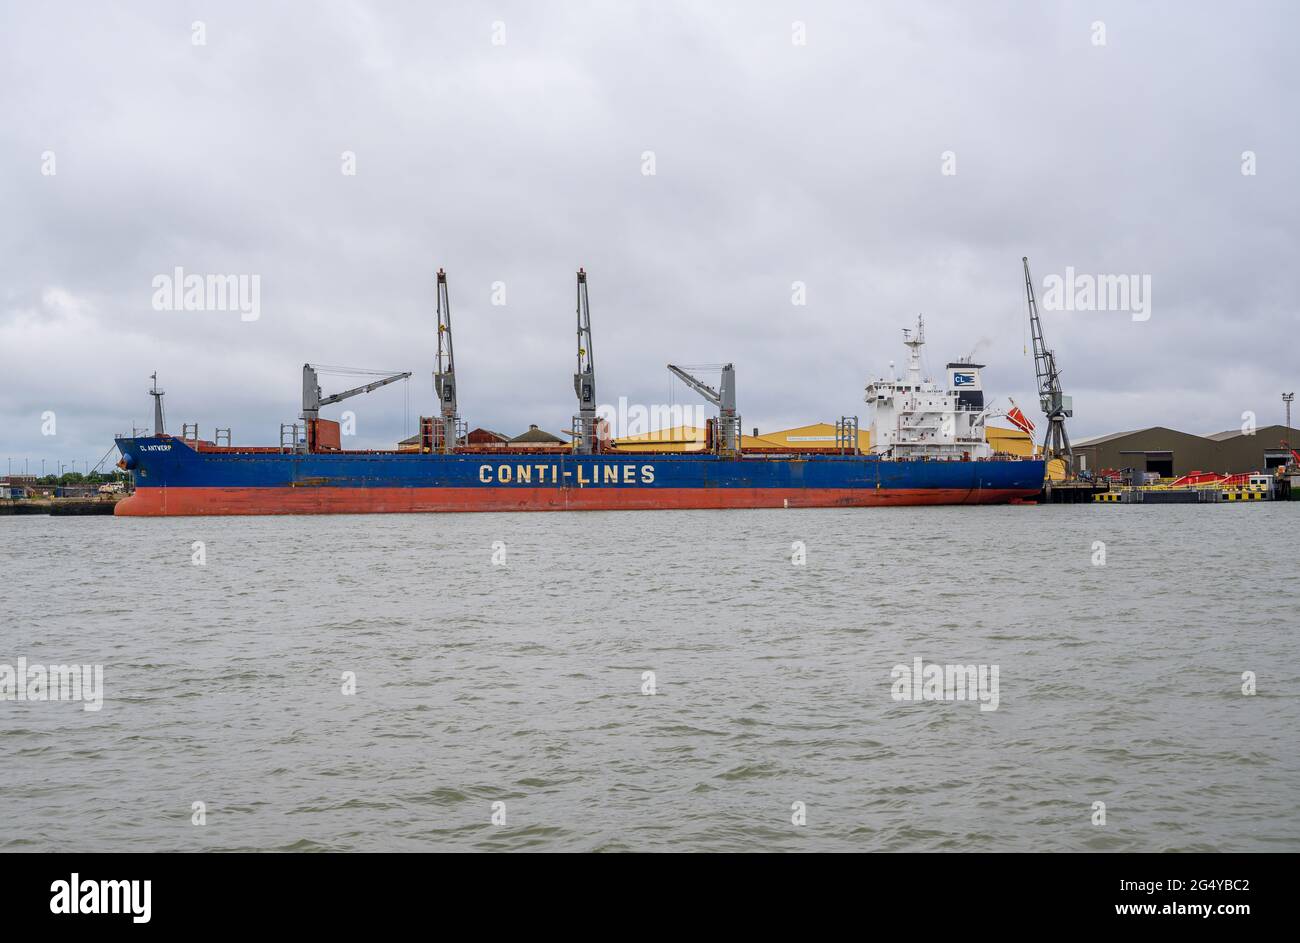 'CL Antwerp' bulk carrier ship, owned by Conti-Lines NV and registered in Belgium moored at Isle of Sheppey, Kent, England. Stock Photo